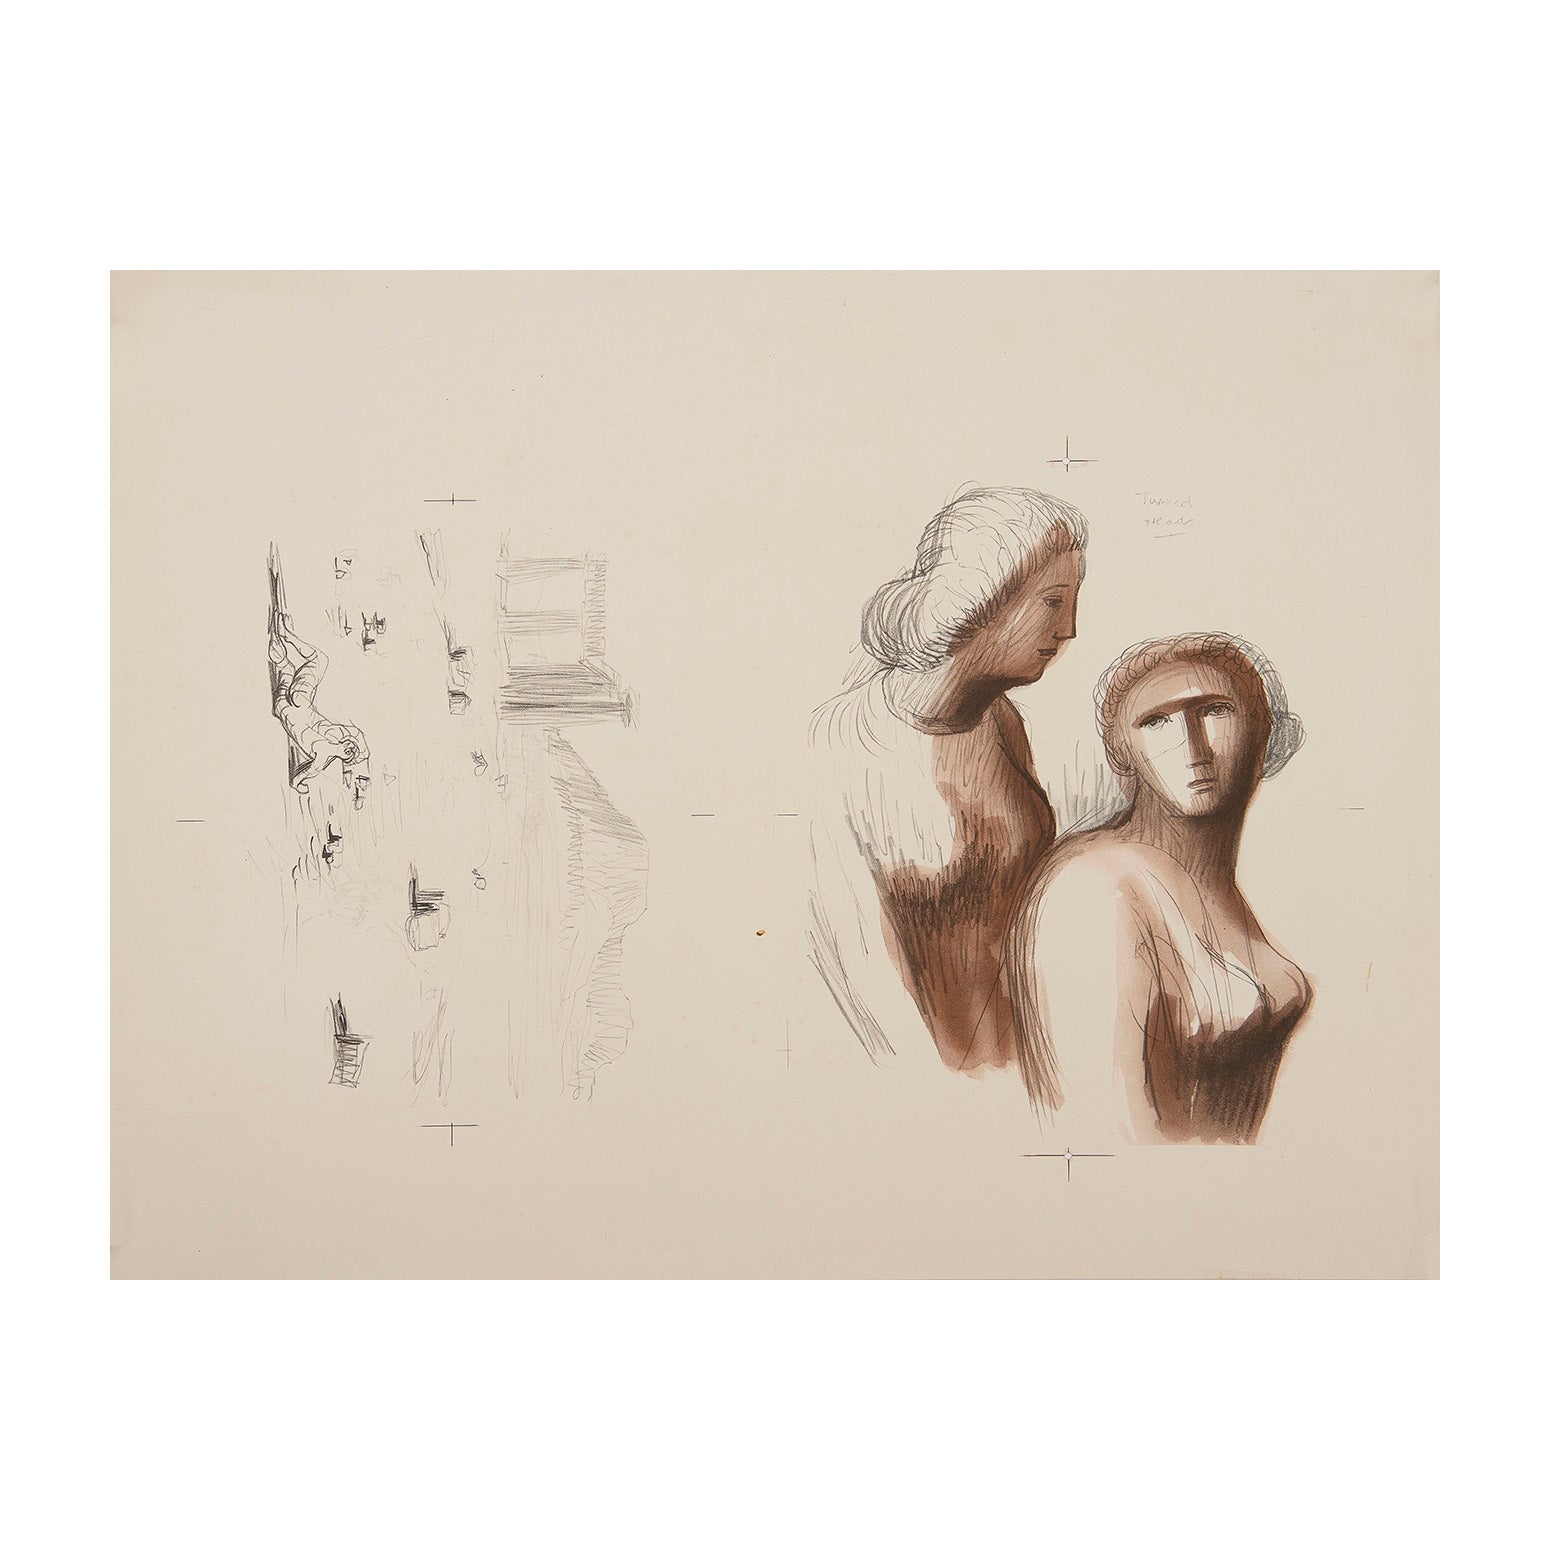 lithographic proof, Two Women; and Seated Madonna, by Henry Moore (1898-1986), Curwen Press, 1958. From the portfolio Heads, Figures, and Ideas